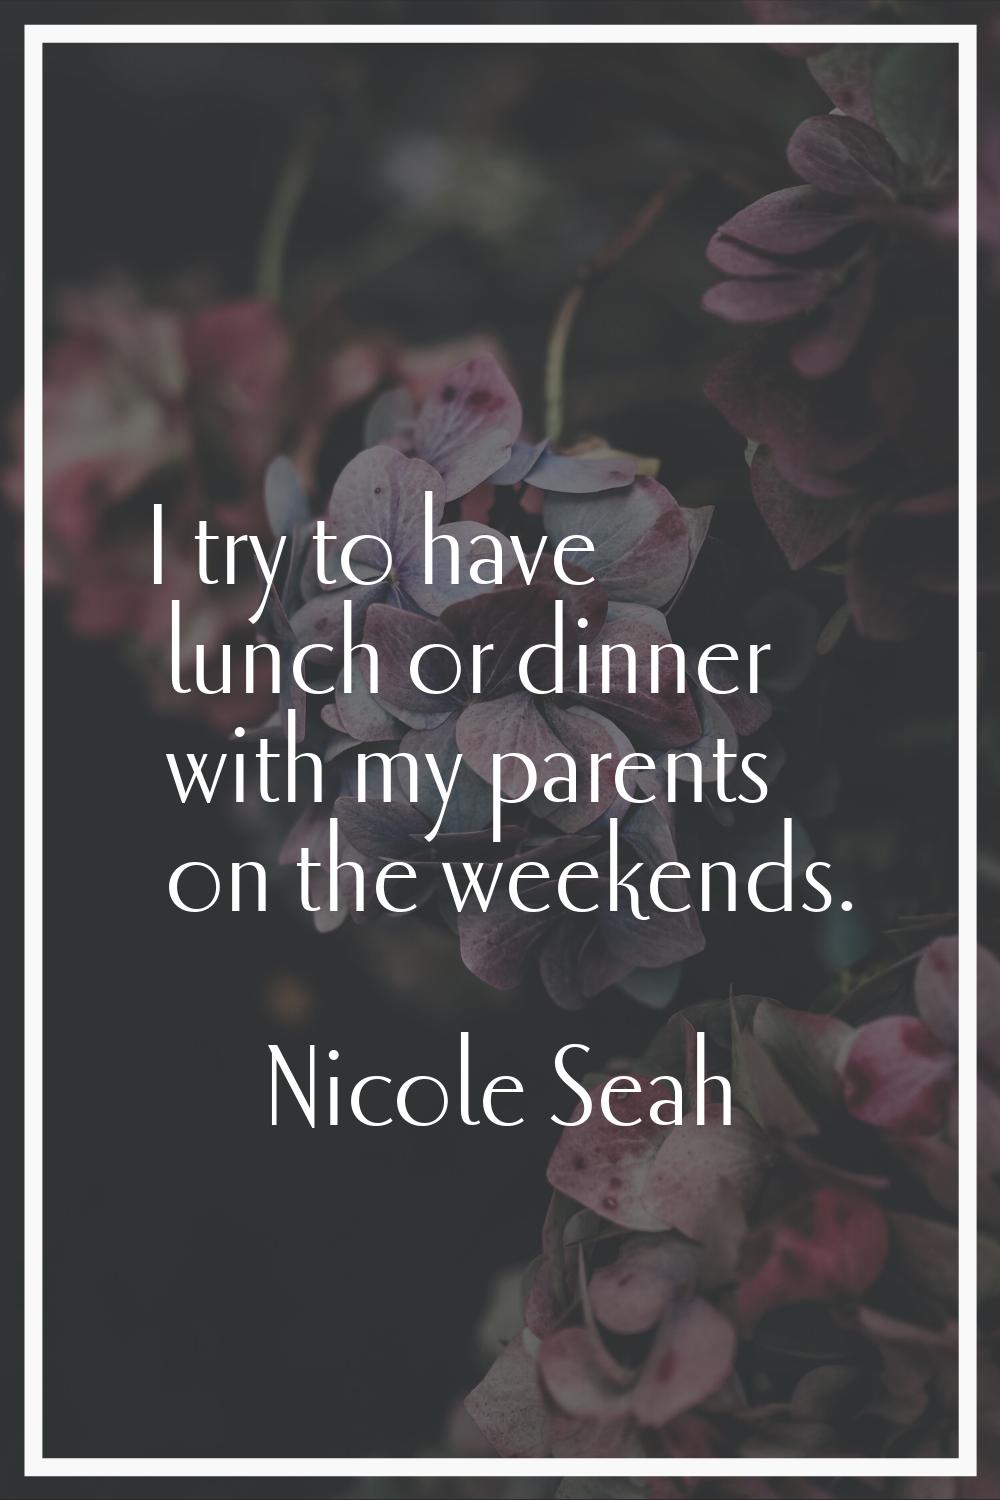 I try to have lunch or dinner with my parents on the weekends.